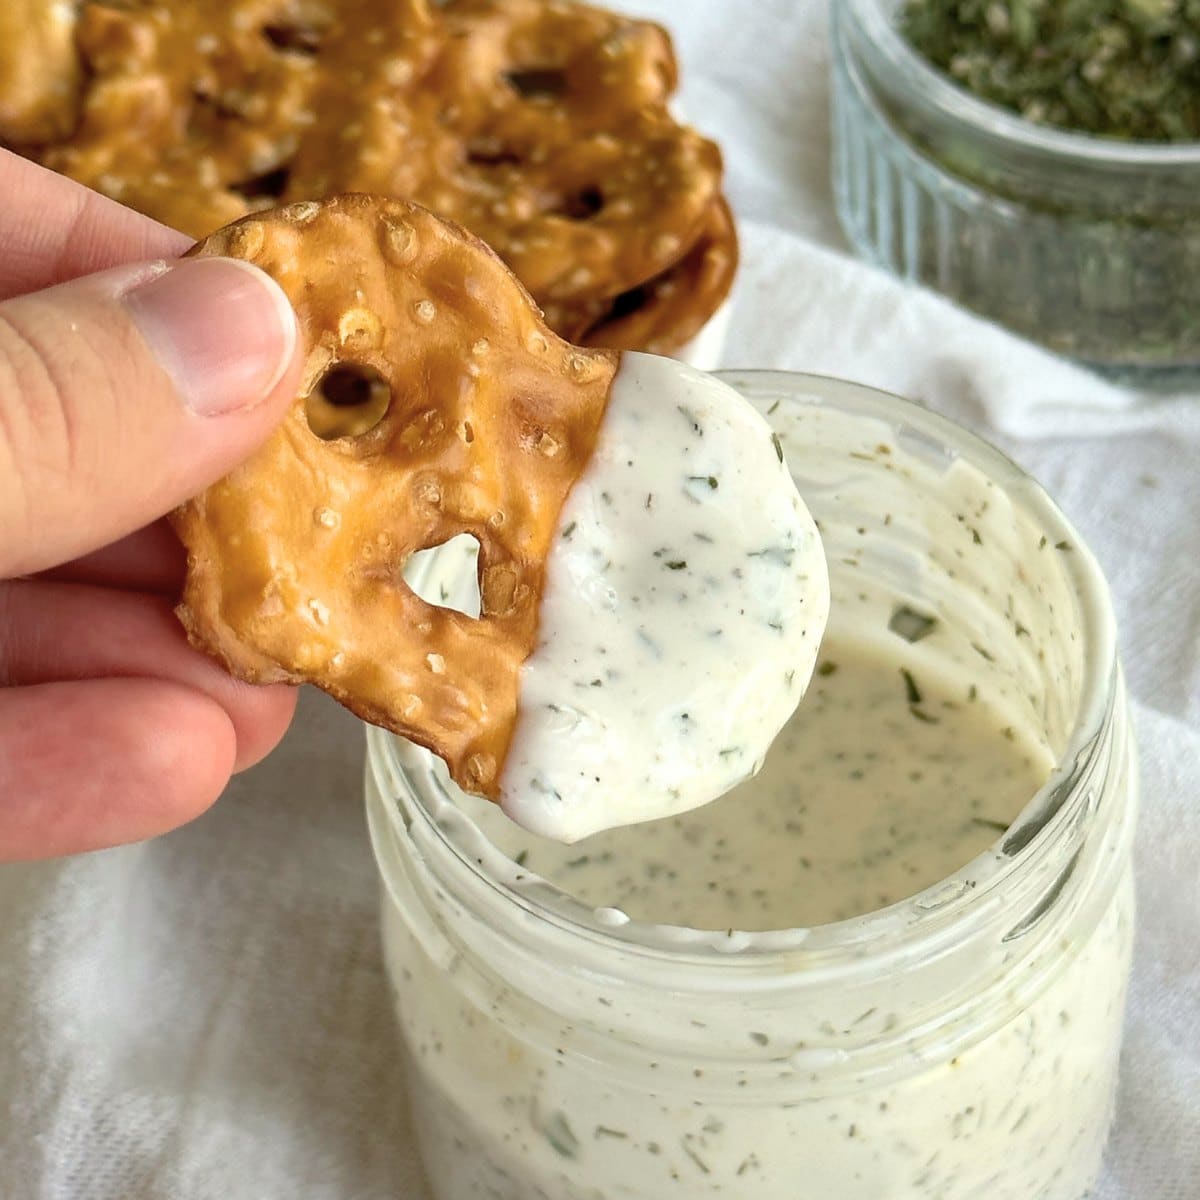 Flat pretzel chip dipped in vegan ranch dressing. Glass jar filled with vegan ranch dressing, plate with pretzels, and dairy-free ranch seasoning are in the background on top of a white cloth.